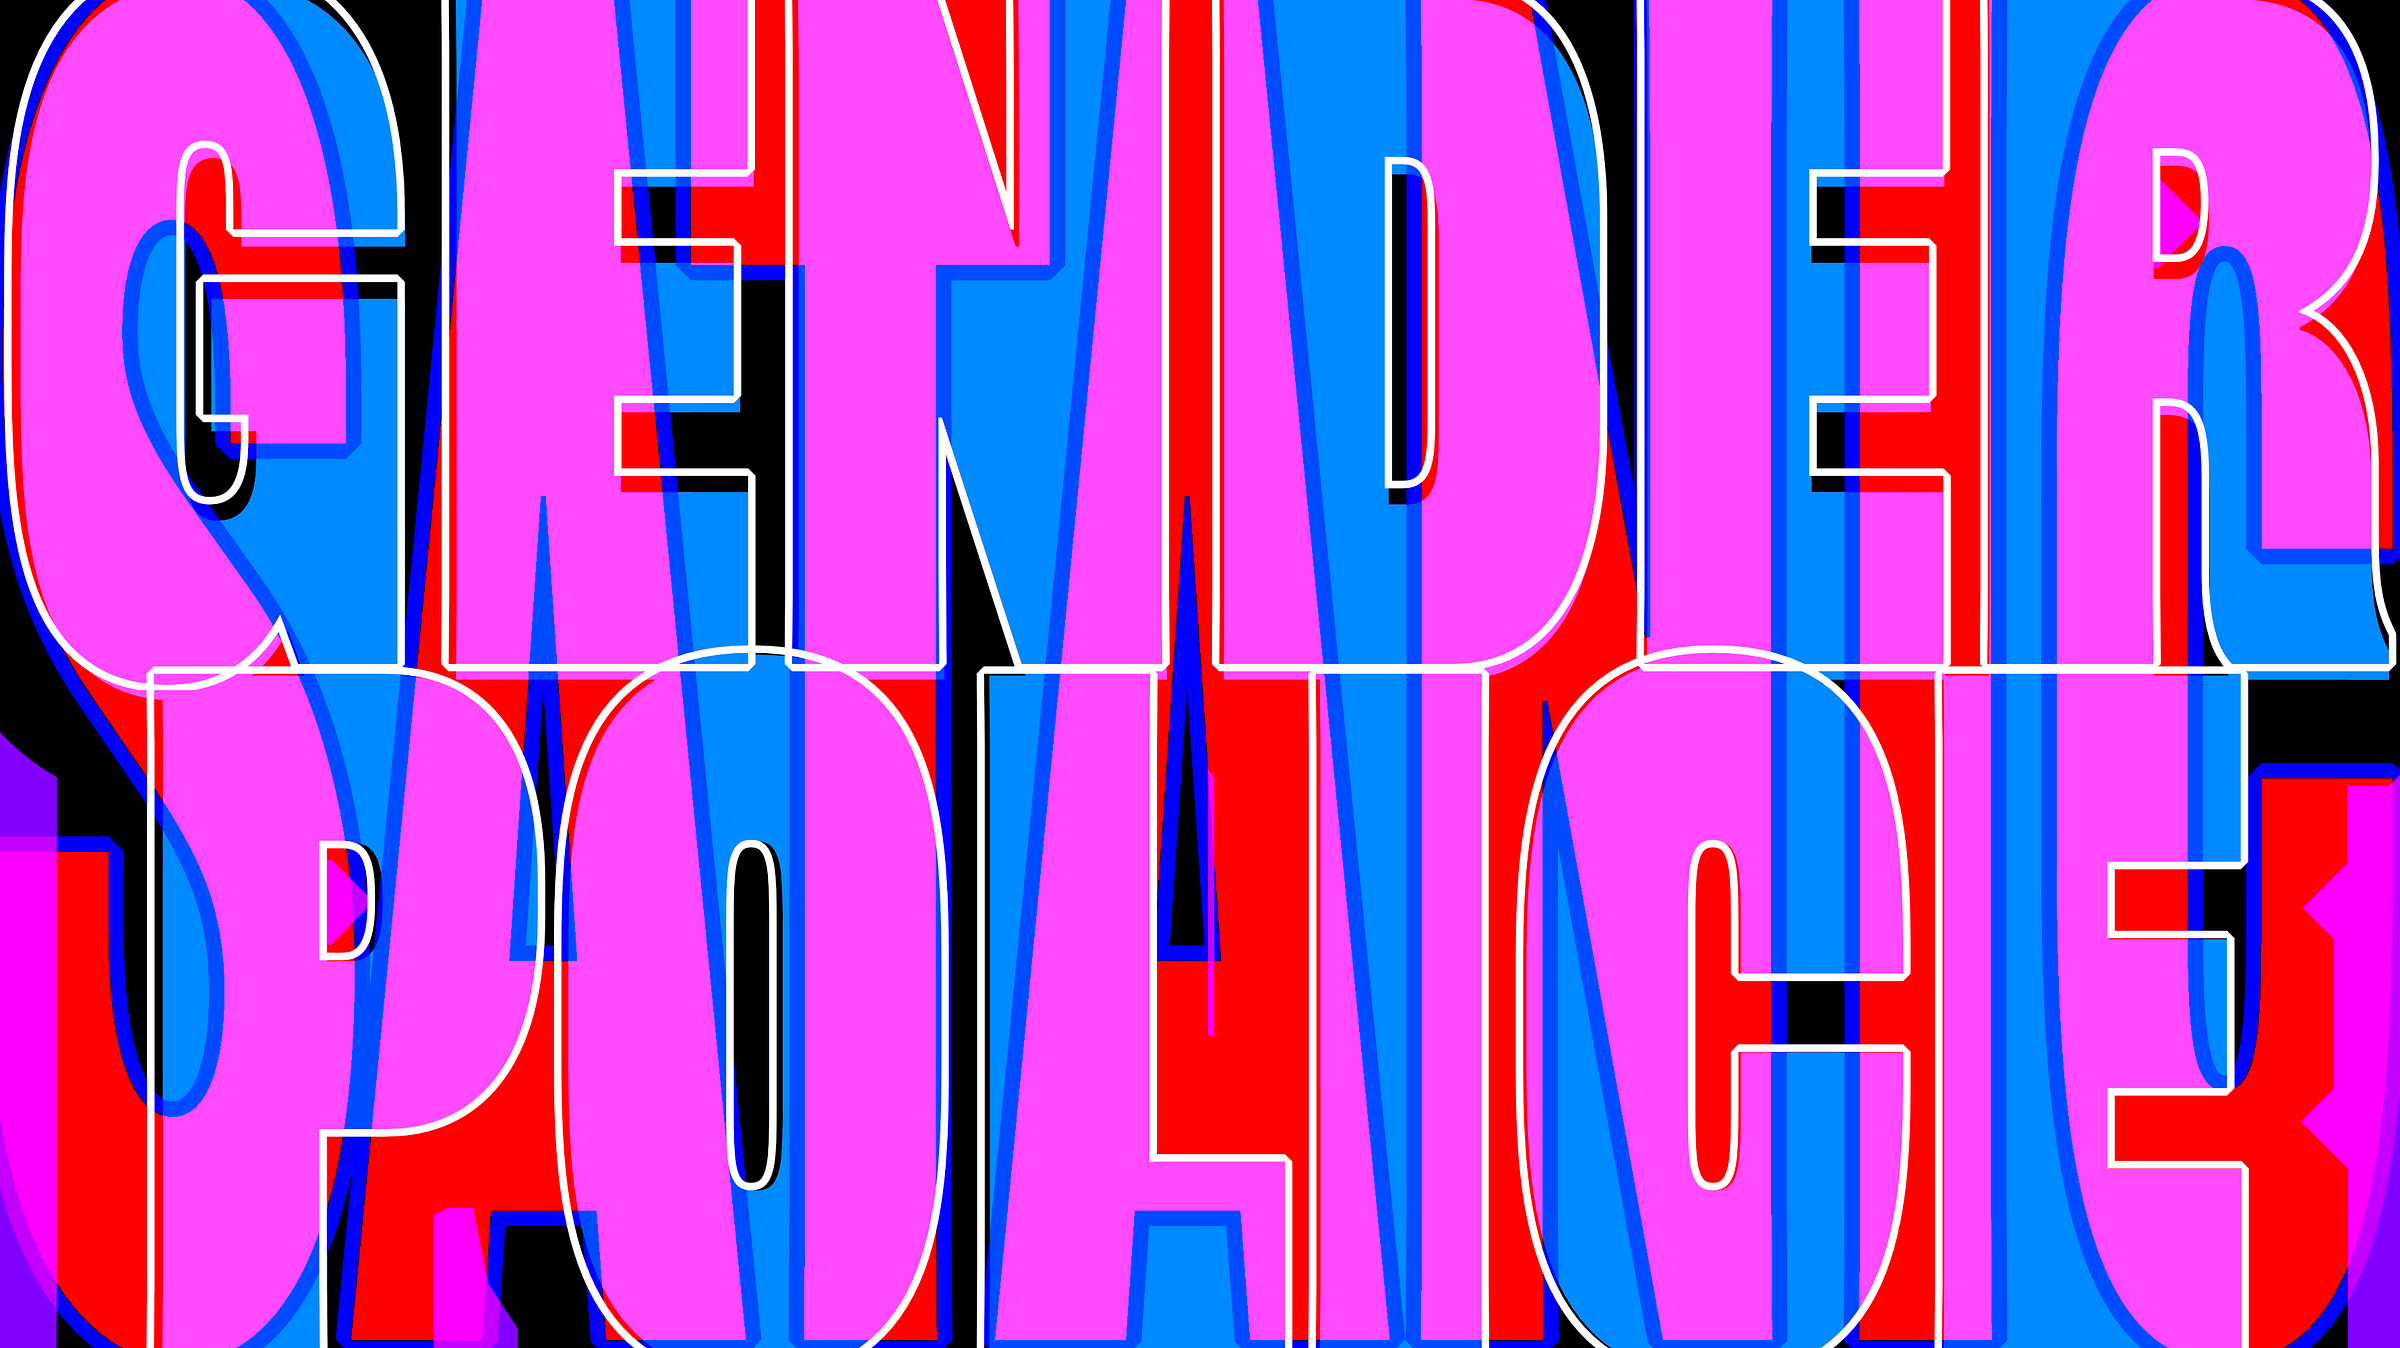 “GENDER POLICE” in blending outline block letters over “SATANIC” in filled red, creating an overlap of pink, baby blue, black, white, and red.